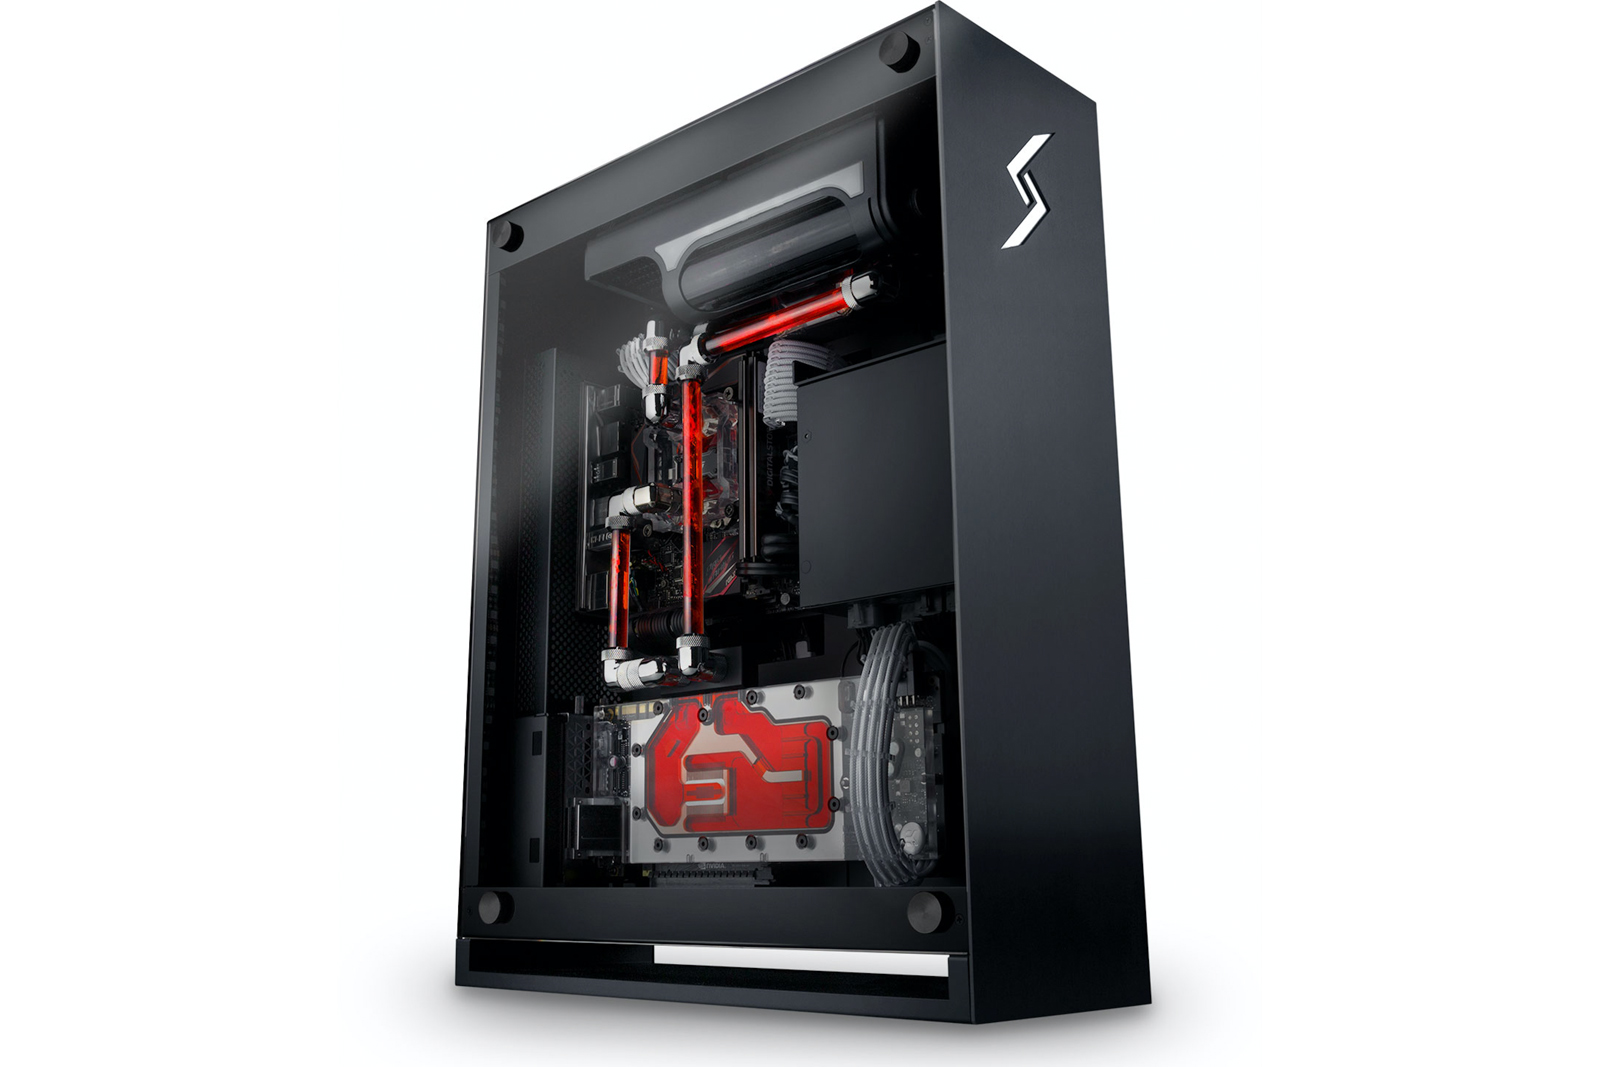 Digital Storm S Compact Gaming Pc Is Fast And Upgrade Friendly